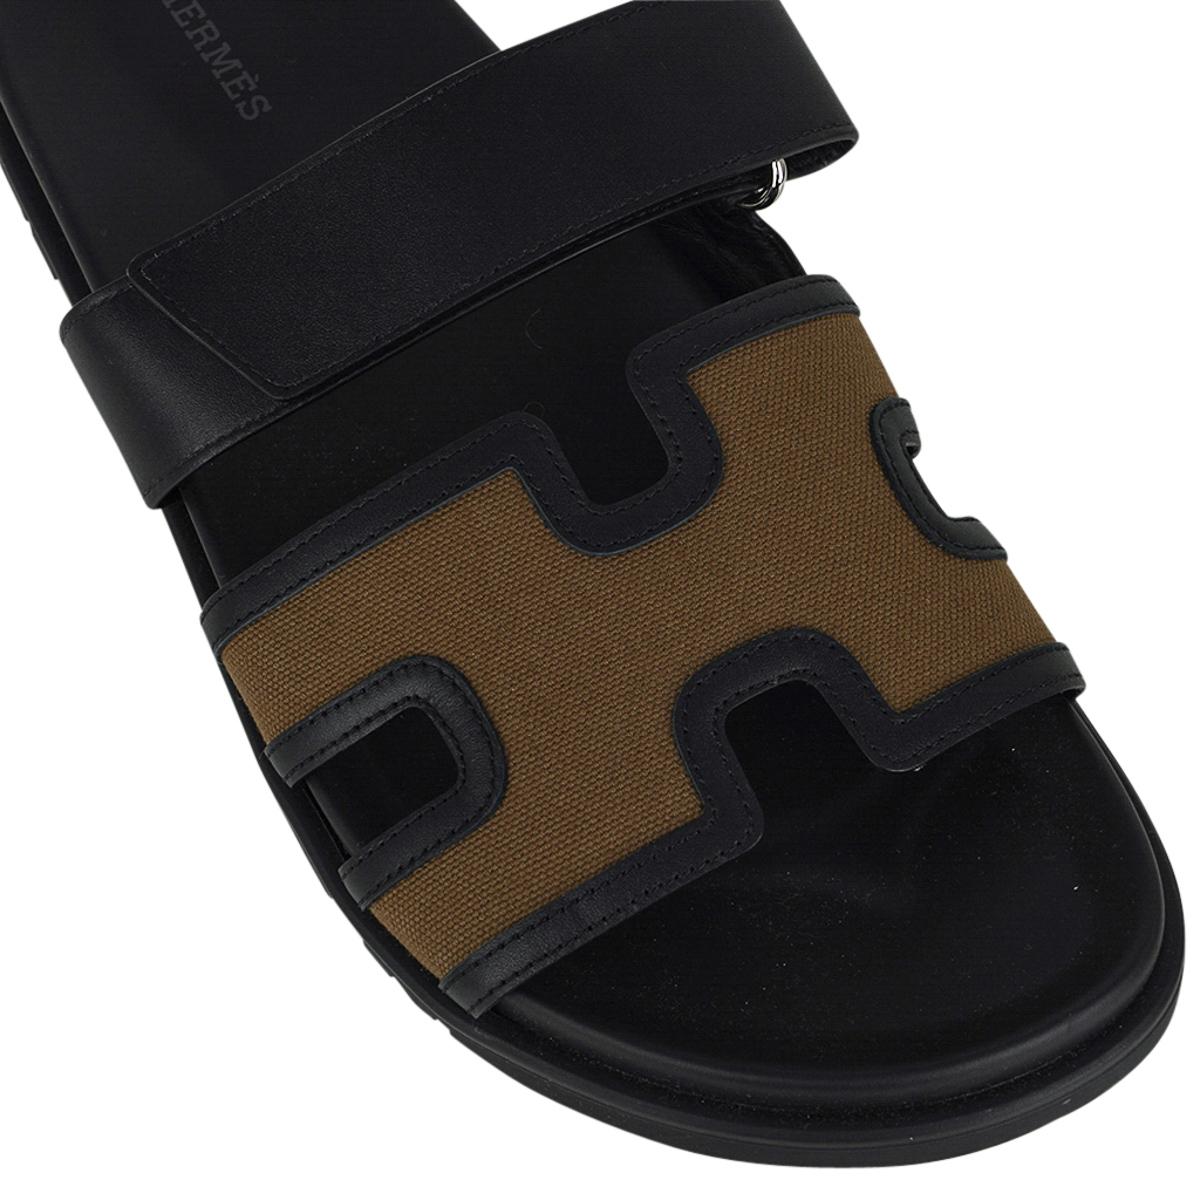 Mightychic offers an Hermes Men's Chypre Sandal featured in Olive Toile with Black leather Trim.
Anatomical insole and H embossed Black rubber sole.
Strap across foot is adjustable with velcro closure.
Comes with sleepers and signature Hermes